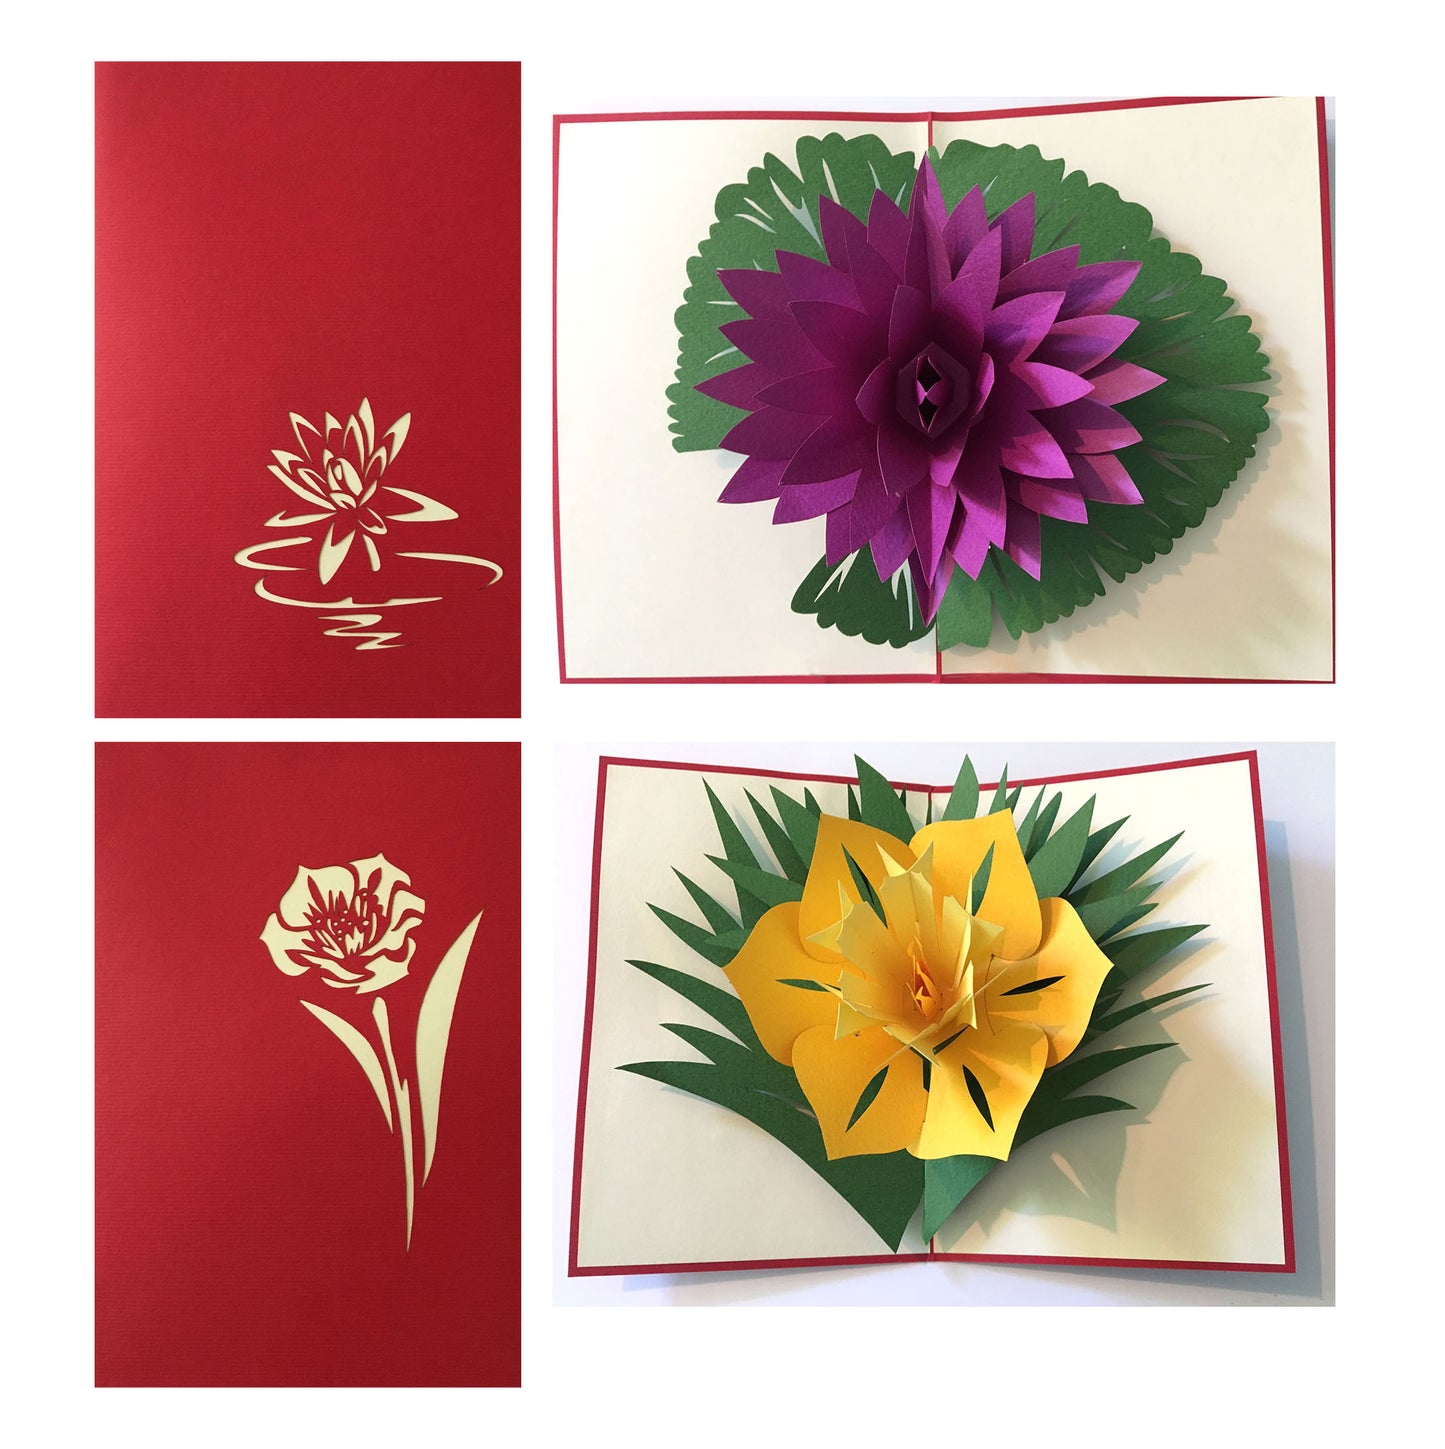 (2 Cards Pack) 3D Pop Up JUMBO FLOWER POP Greeting Card 5x7 Inch 12.7 cm Tropical Flowers Narcissus Lotus Daffodil